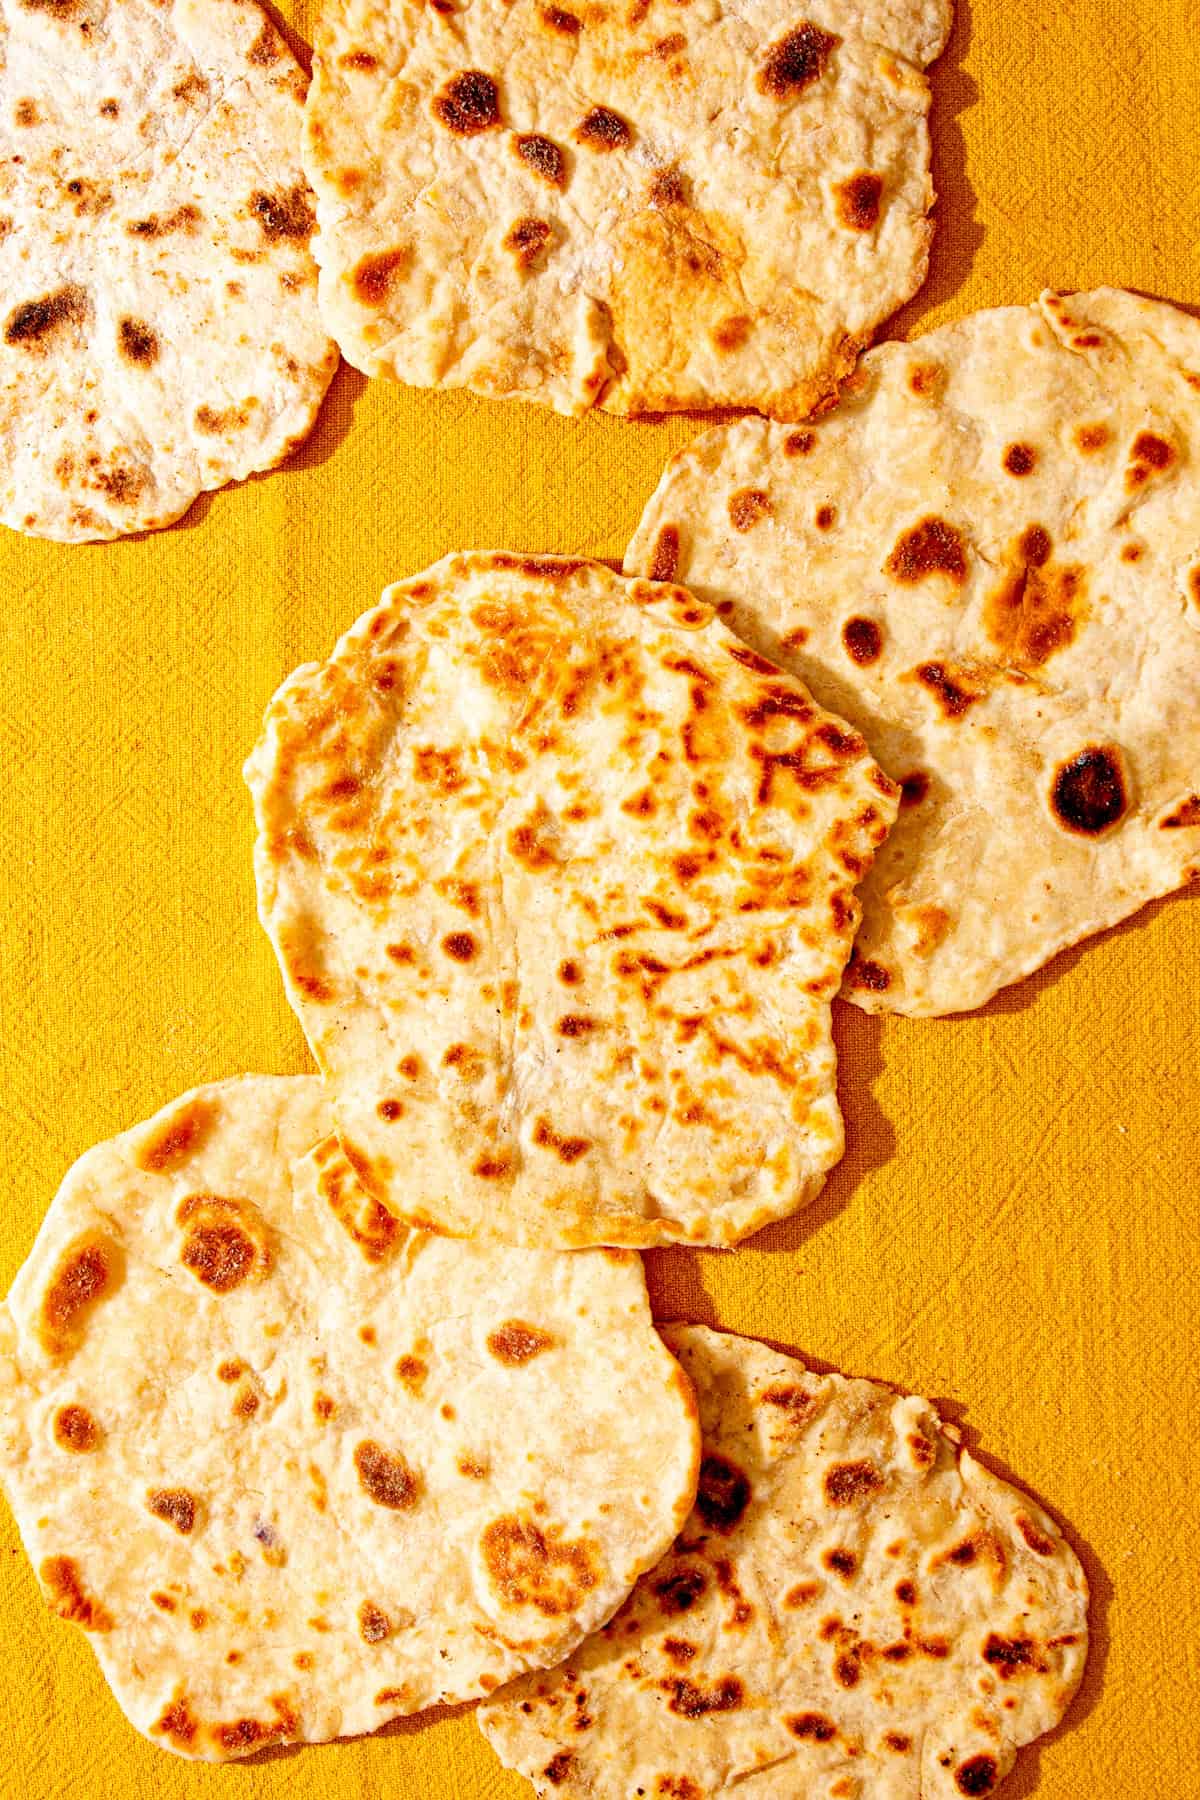 Golden browned flatbreads on a yellowy coloured cloth.